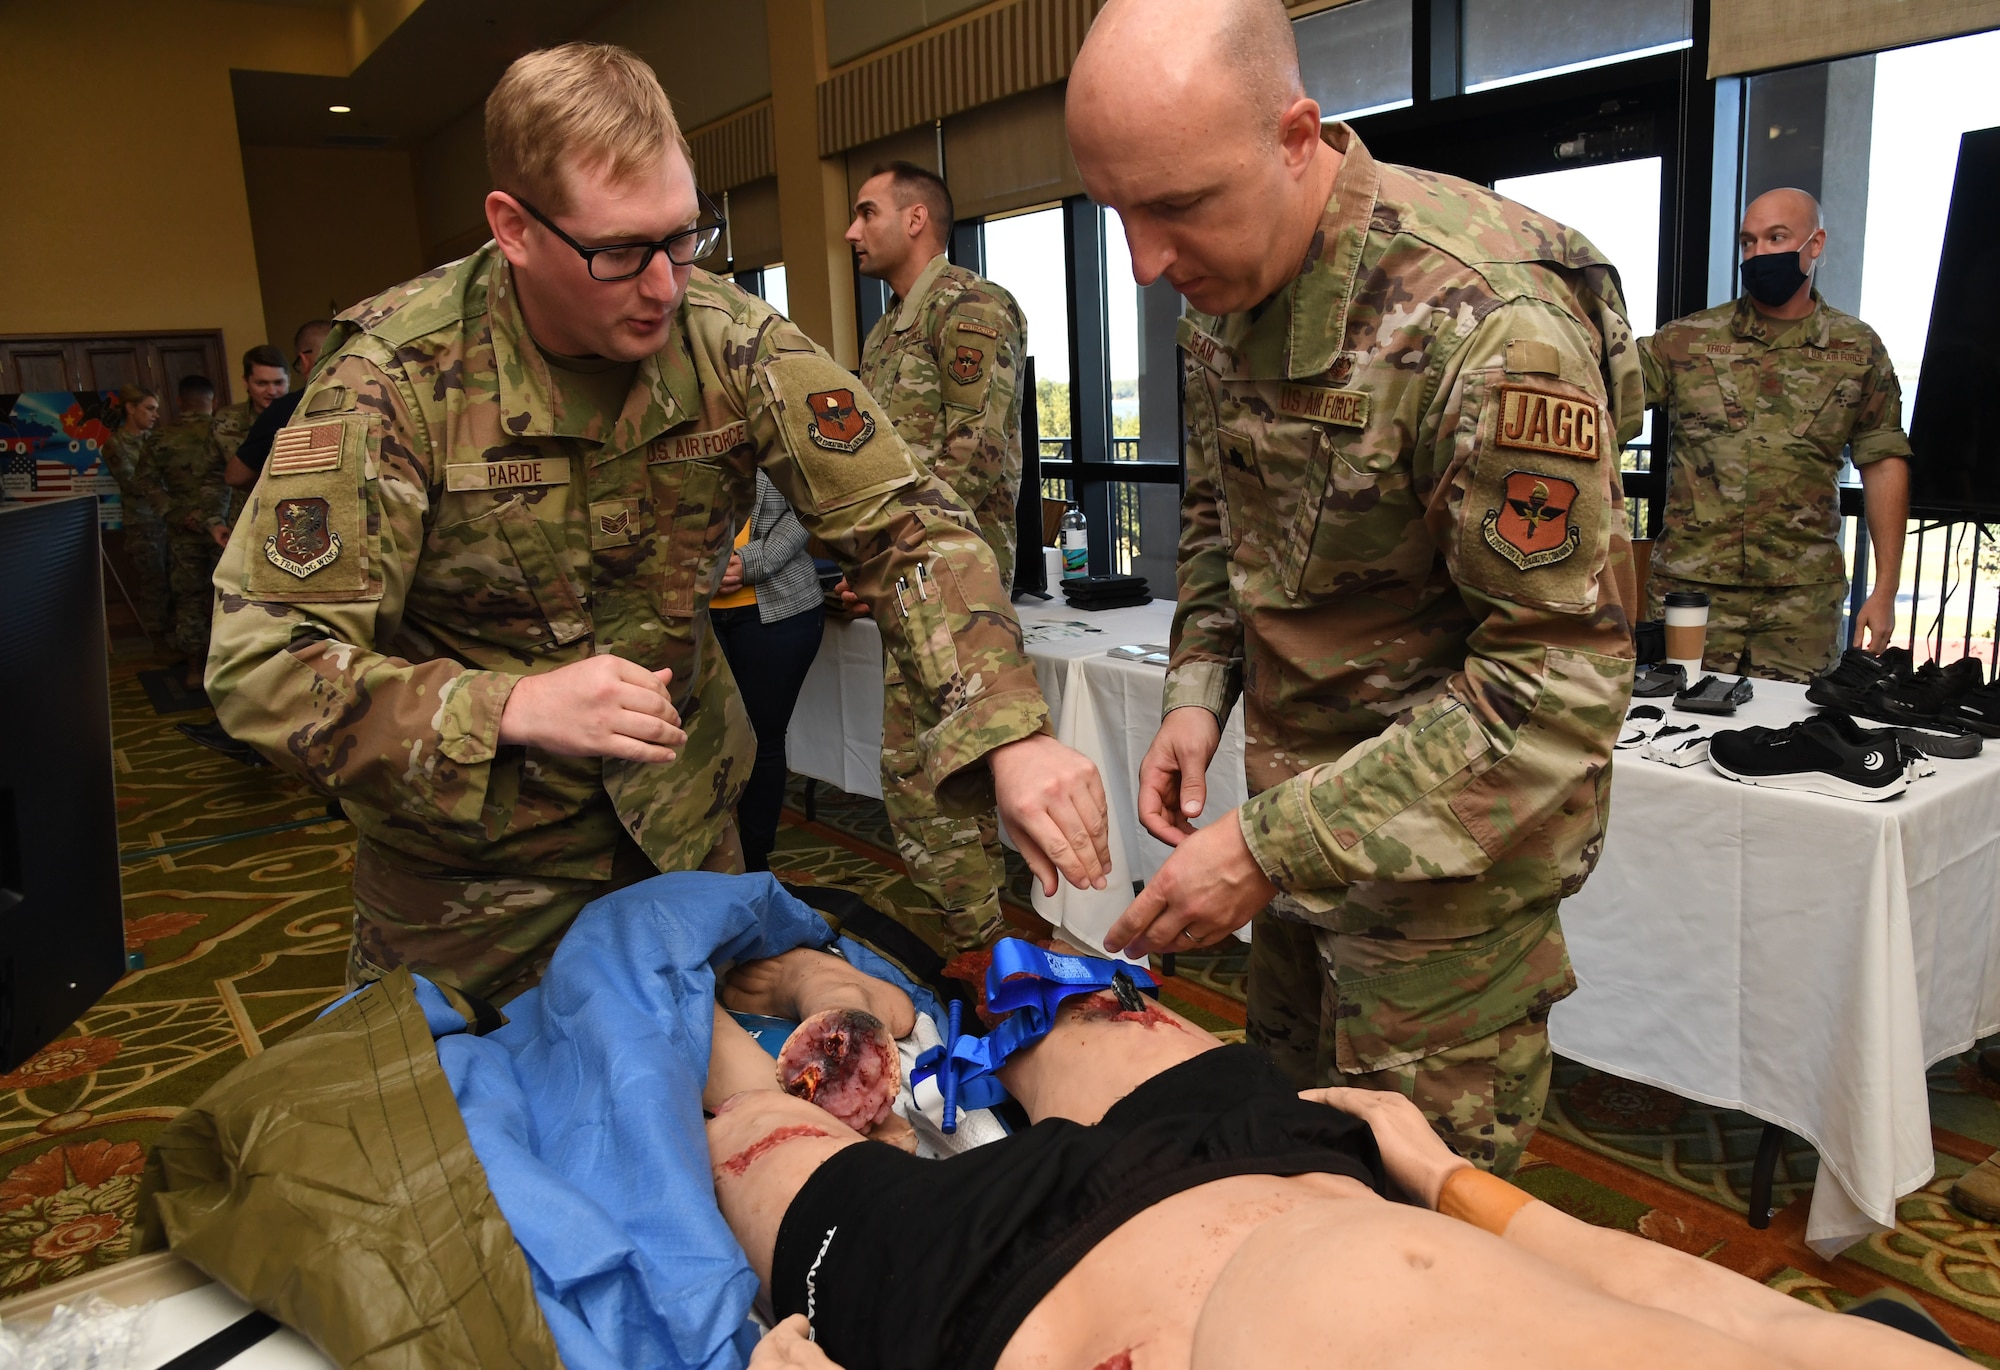 U.S. Air Force Staff Sgt. Timothy Parde, 81st Medical Support Squadron tactical combat casualty care advisor, demonstrates tourniquet application with Lt. Col. Matt Ream, 82nd Training Wing staff judge advocate, during the innovation expo during the Second Air Force Technical Training-101 Seminar inside the Bay Breeze Event Center at Keesler Air Force Base, Mississippi, Oct. 26, 2022.